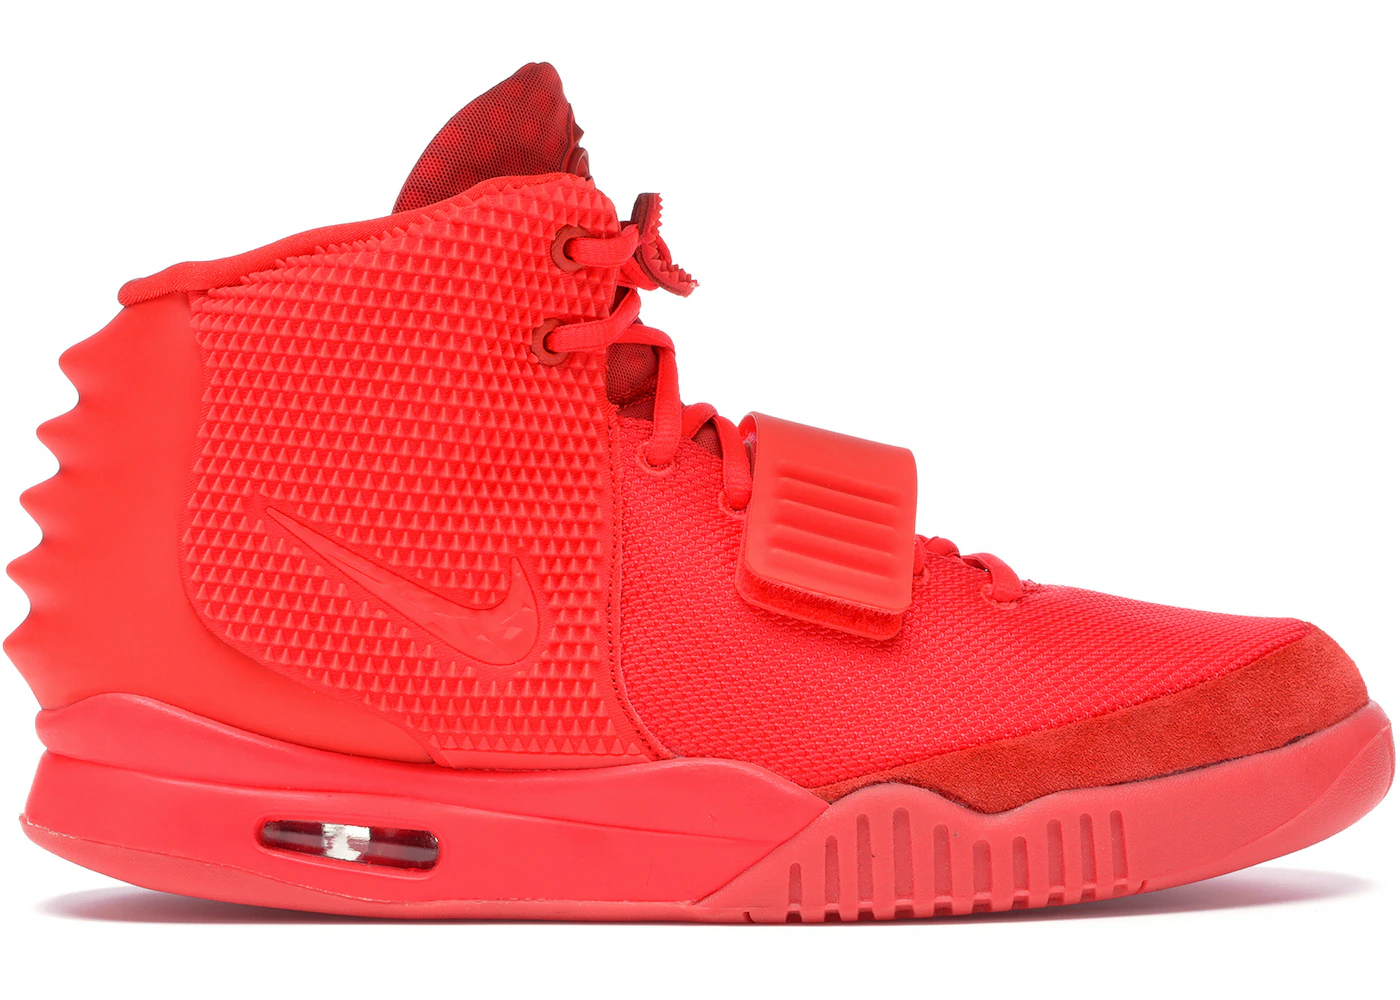 volleyball social latin Nike Air Yeezy 2 Red October Men's - 508214-660 - US